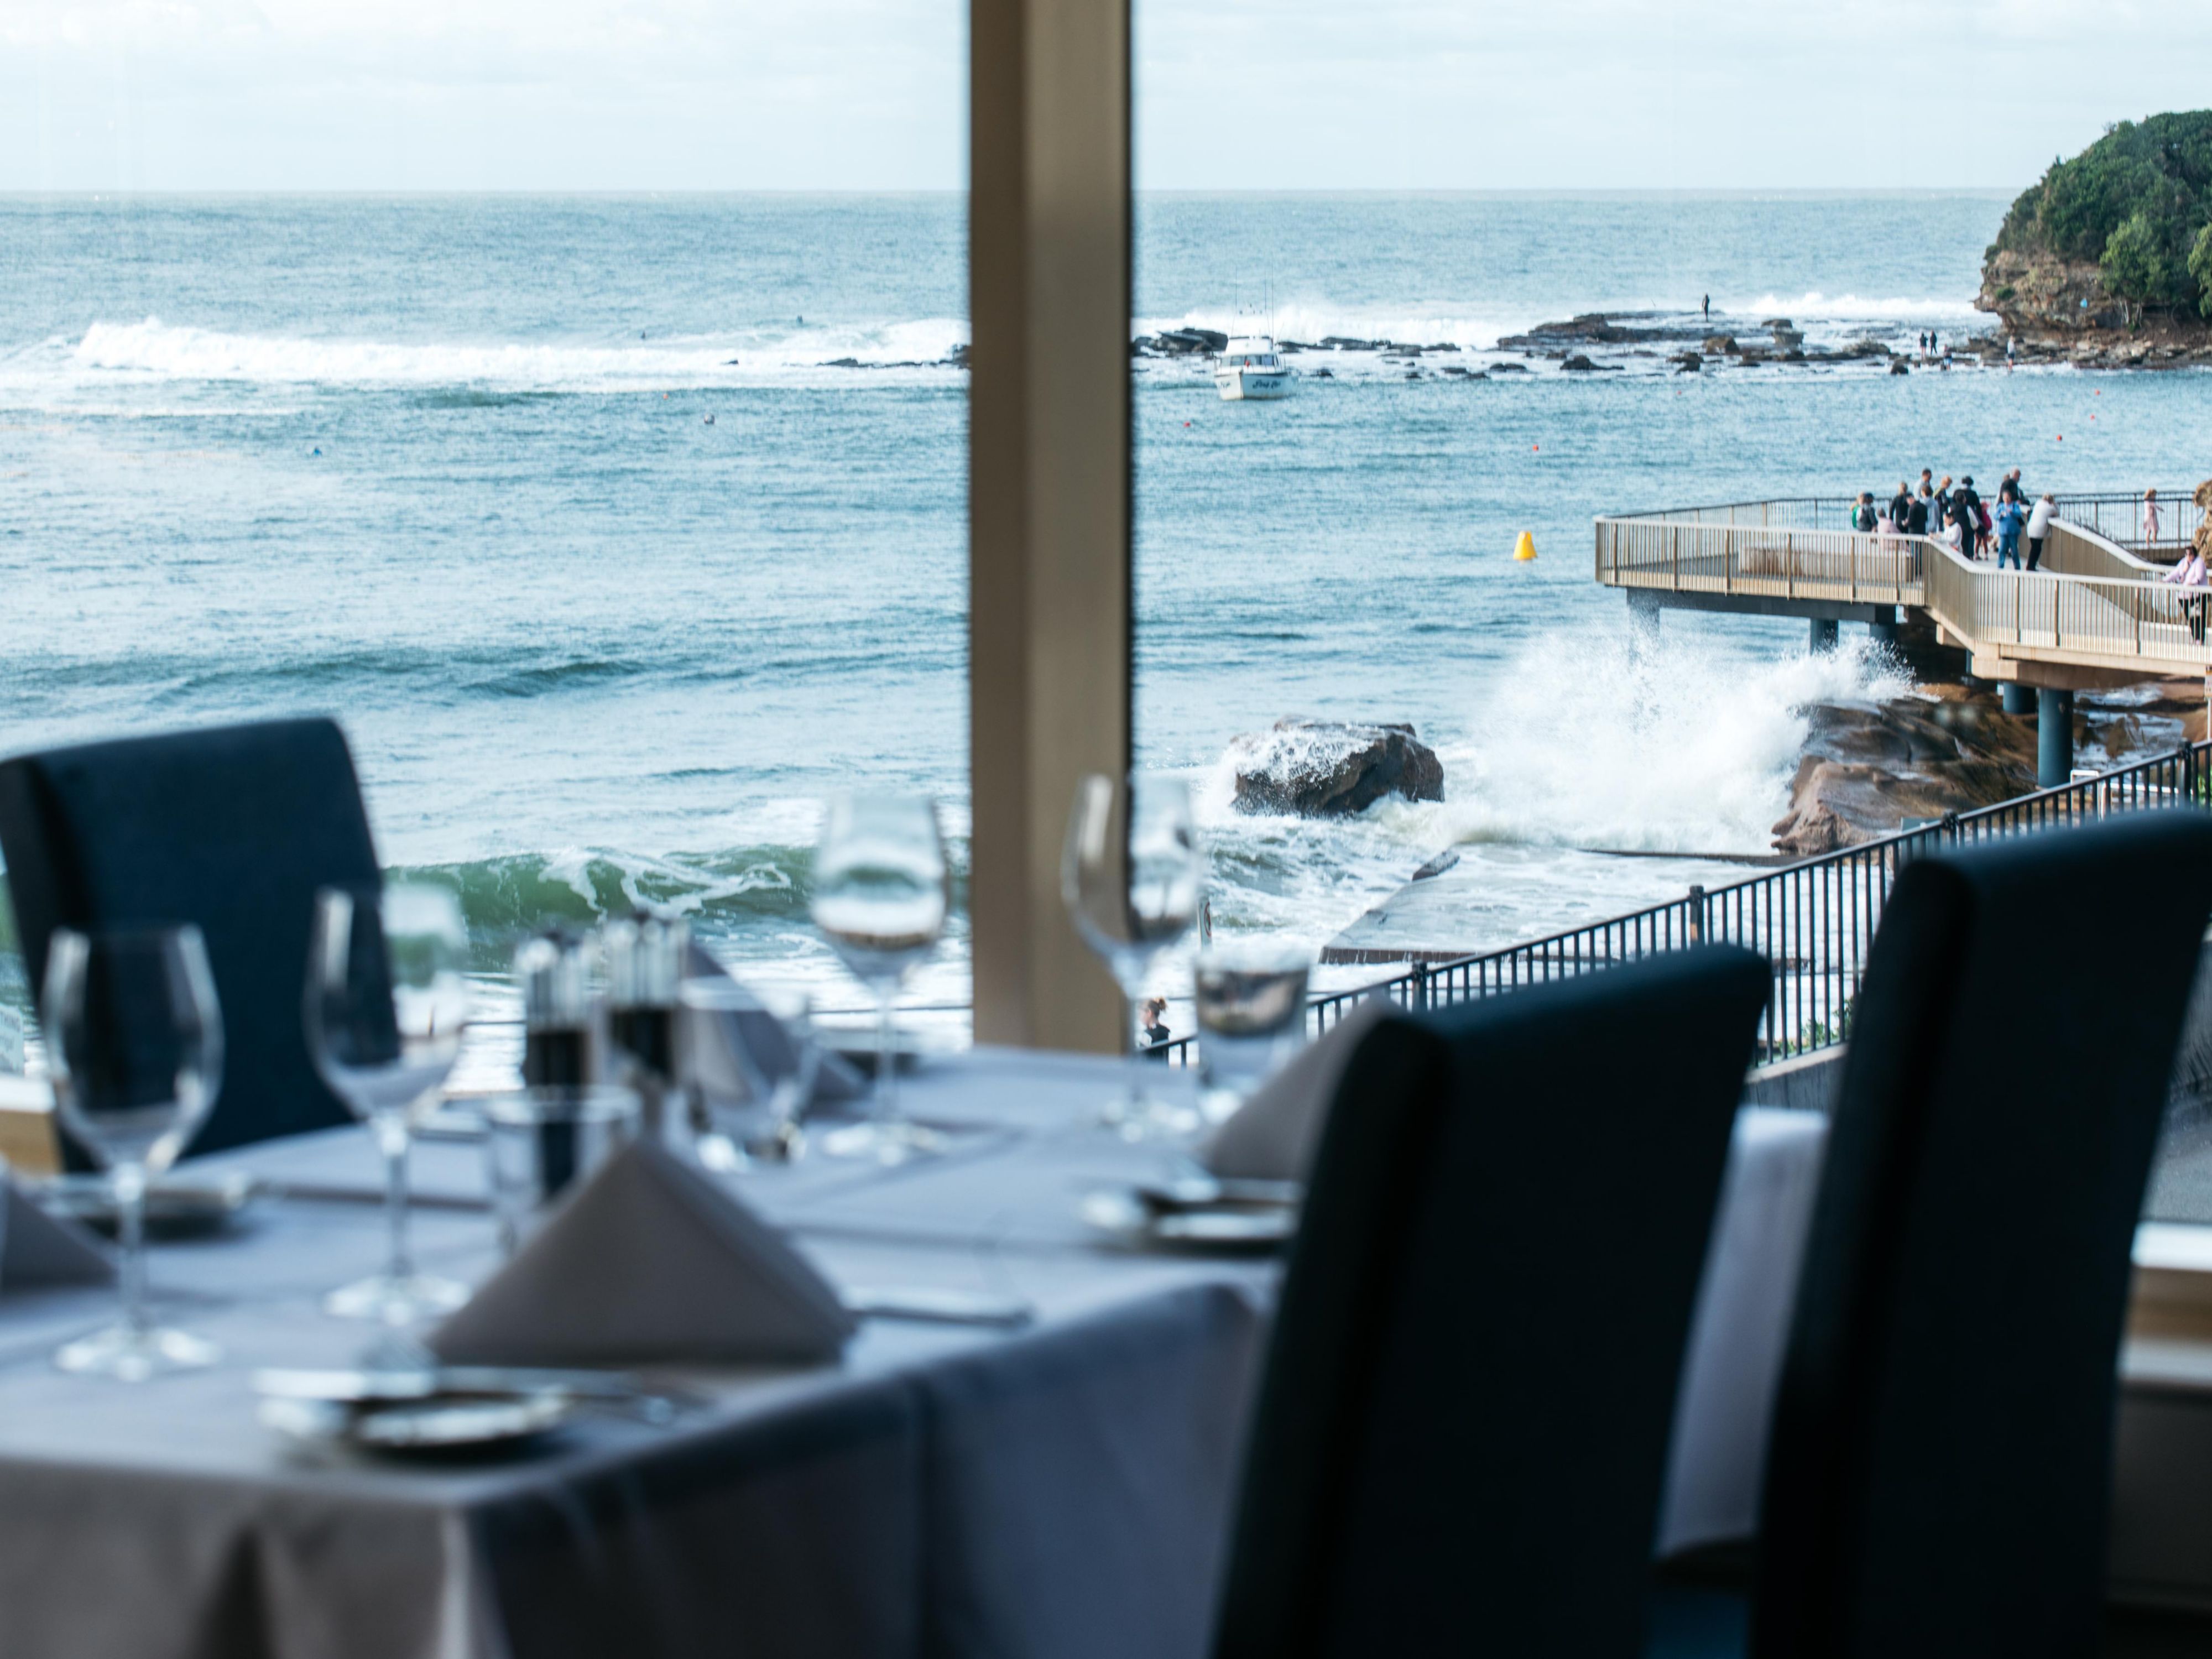 For a dining experience with a difference, you can’t go past Seasalt Restaurant with breathtaking ocean views and fresh seasonal menus. Offering a buffet breakfast and dinner over stunning ocean views.